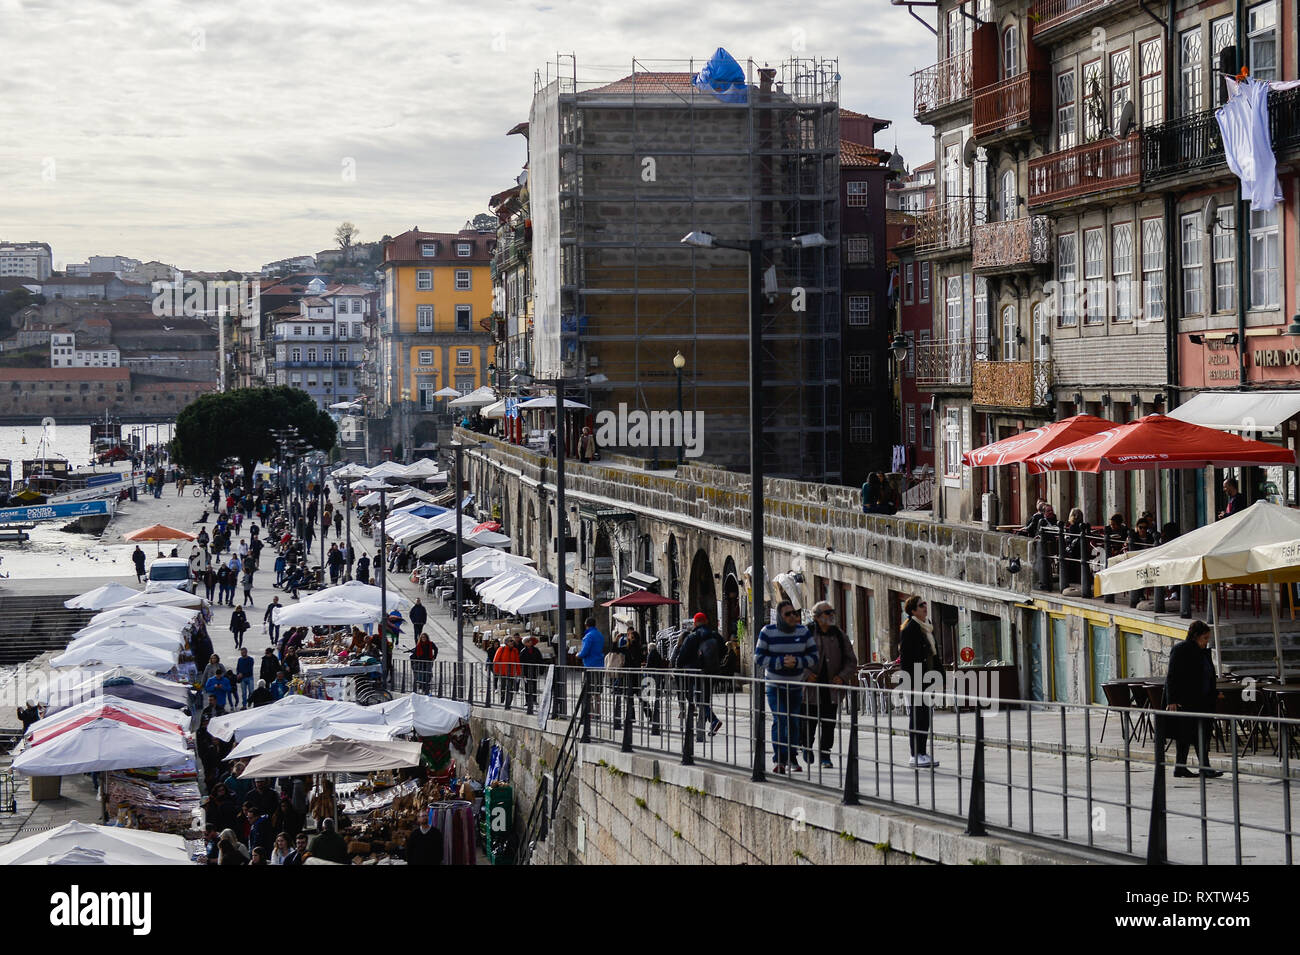 Tourists and locals seen walking with in the historical neighbourhood of Ribeira. In 2018, Porto entered the list of the 100 most visited cities in the world in a ranking prepared by Euromonitor International. In 2018 it is estimated that the number of tourists reached 2.39 million. Stock Photo